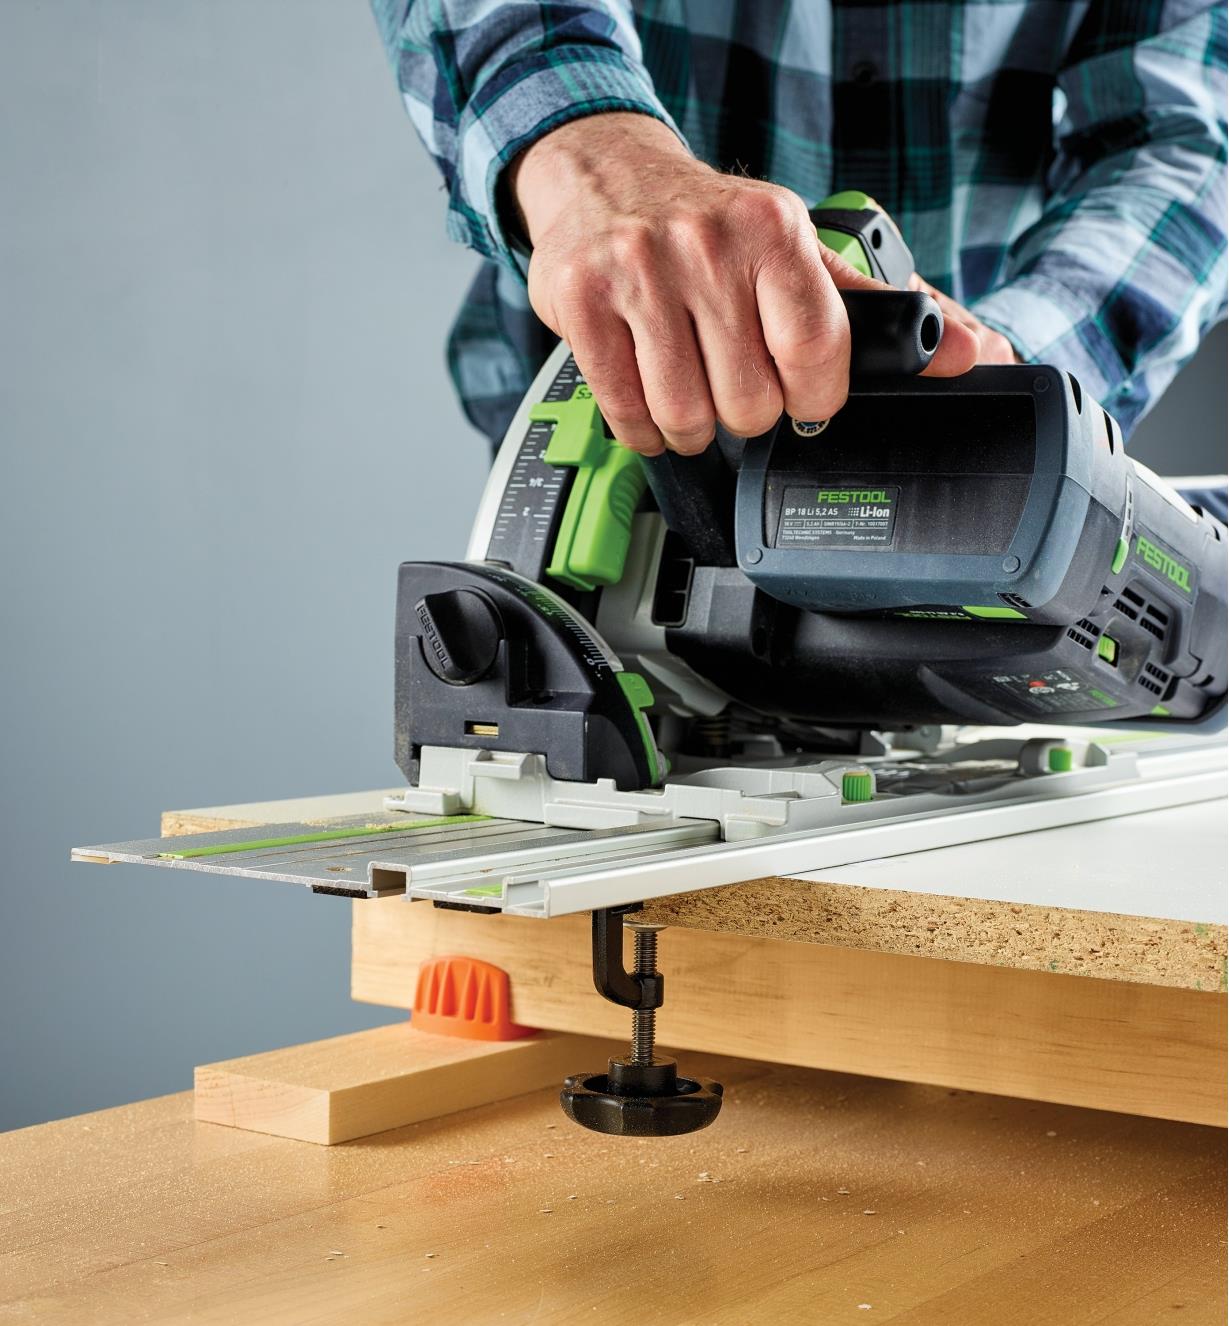 Cutting particleboard with a track saw on a track-saw guide held in place by track-saw guide clamps